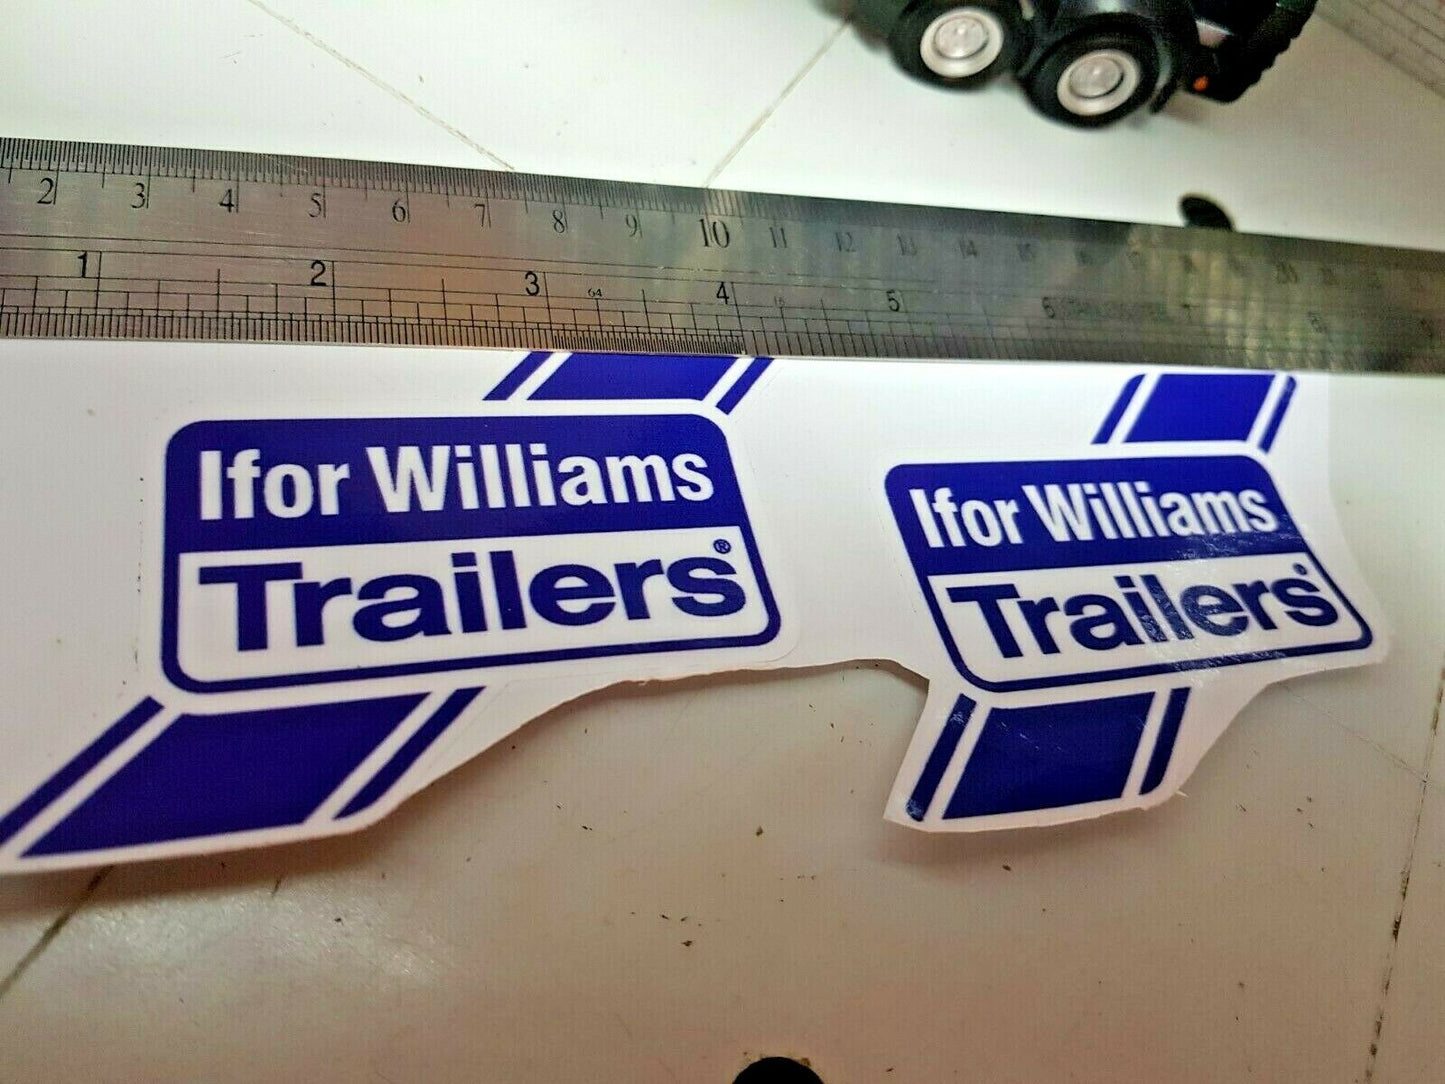 Ifor Williams OEM Livestock Tipping Tiltbed Trailer Mudguard Decals Stickers x2